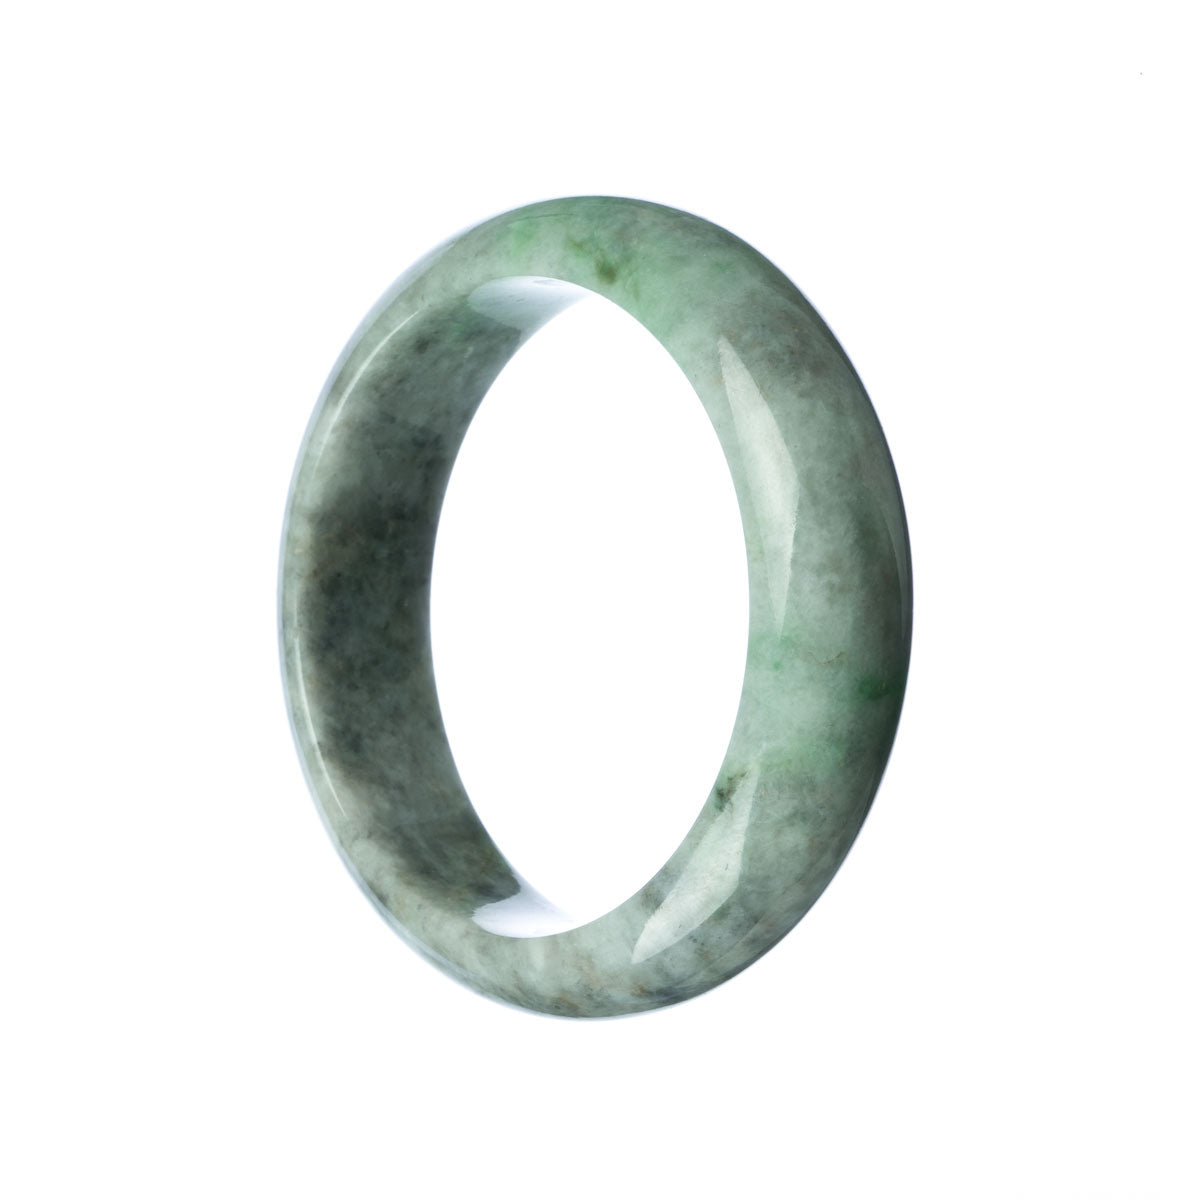 A close-up image of a grey jade bangle bracelet with a half-moon shape, measuring 63mm in diameter. This authentic Type A Burma jade bracelet is beautifully crafted and designed by MAYS.